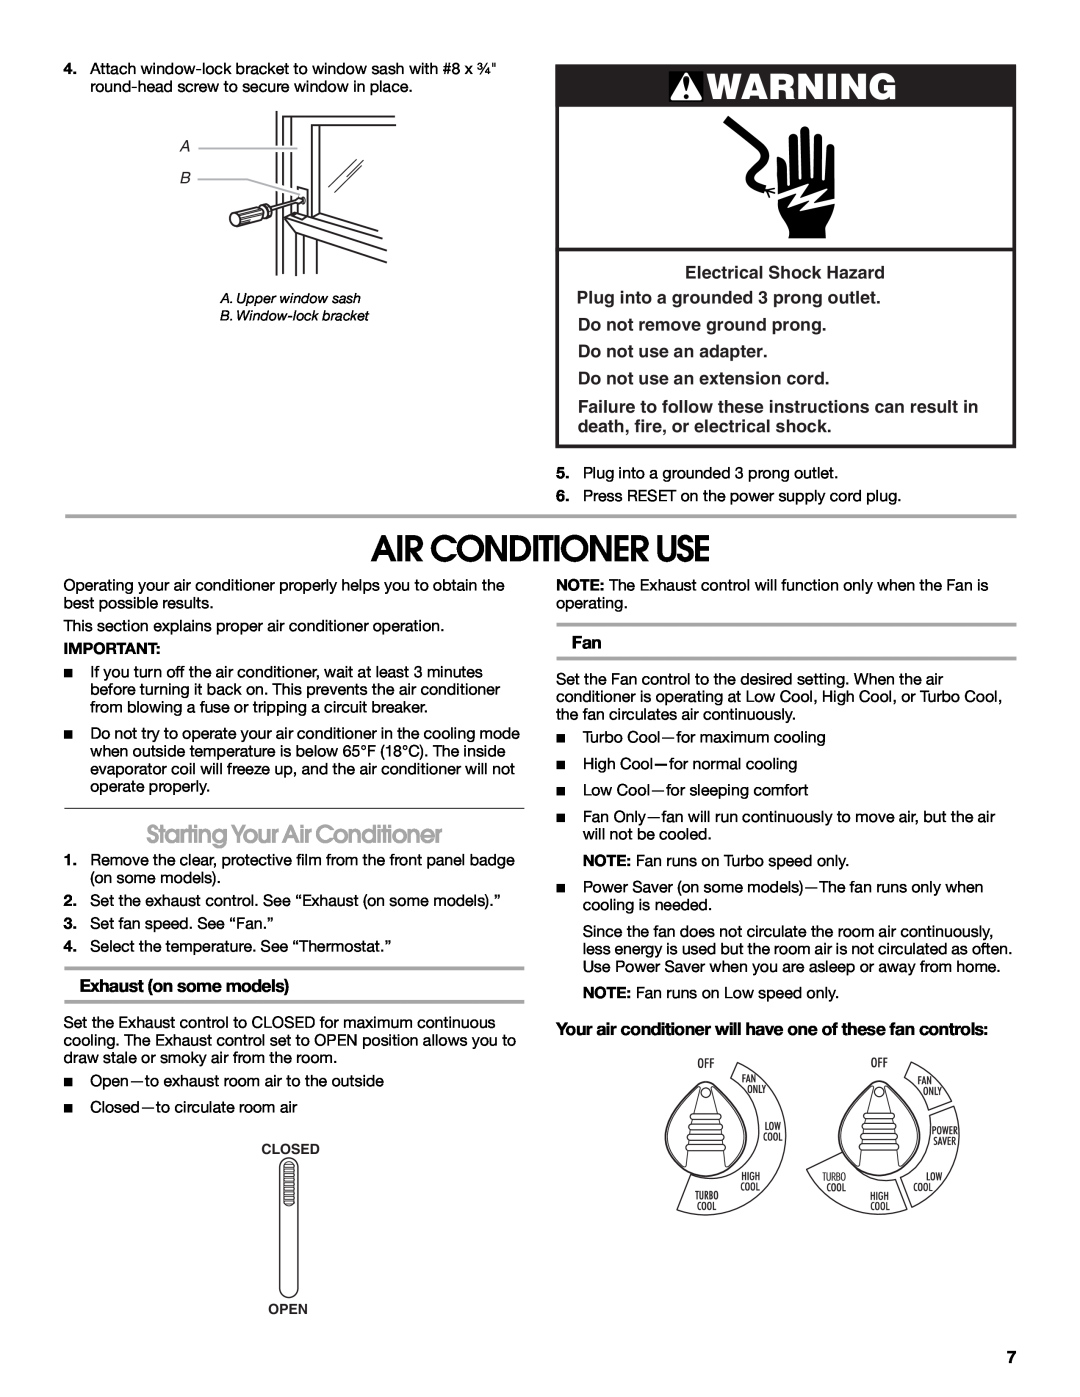 Whirlpool ACM122XR0 manual Air Conditioner Use, Starting Your Air Conditioner, Exhaust on some models 